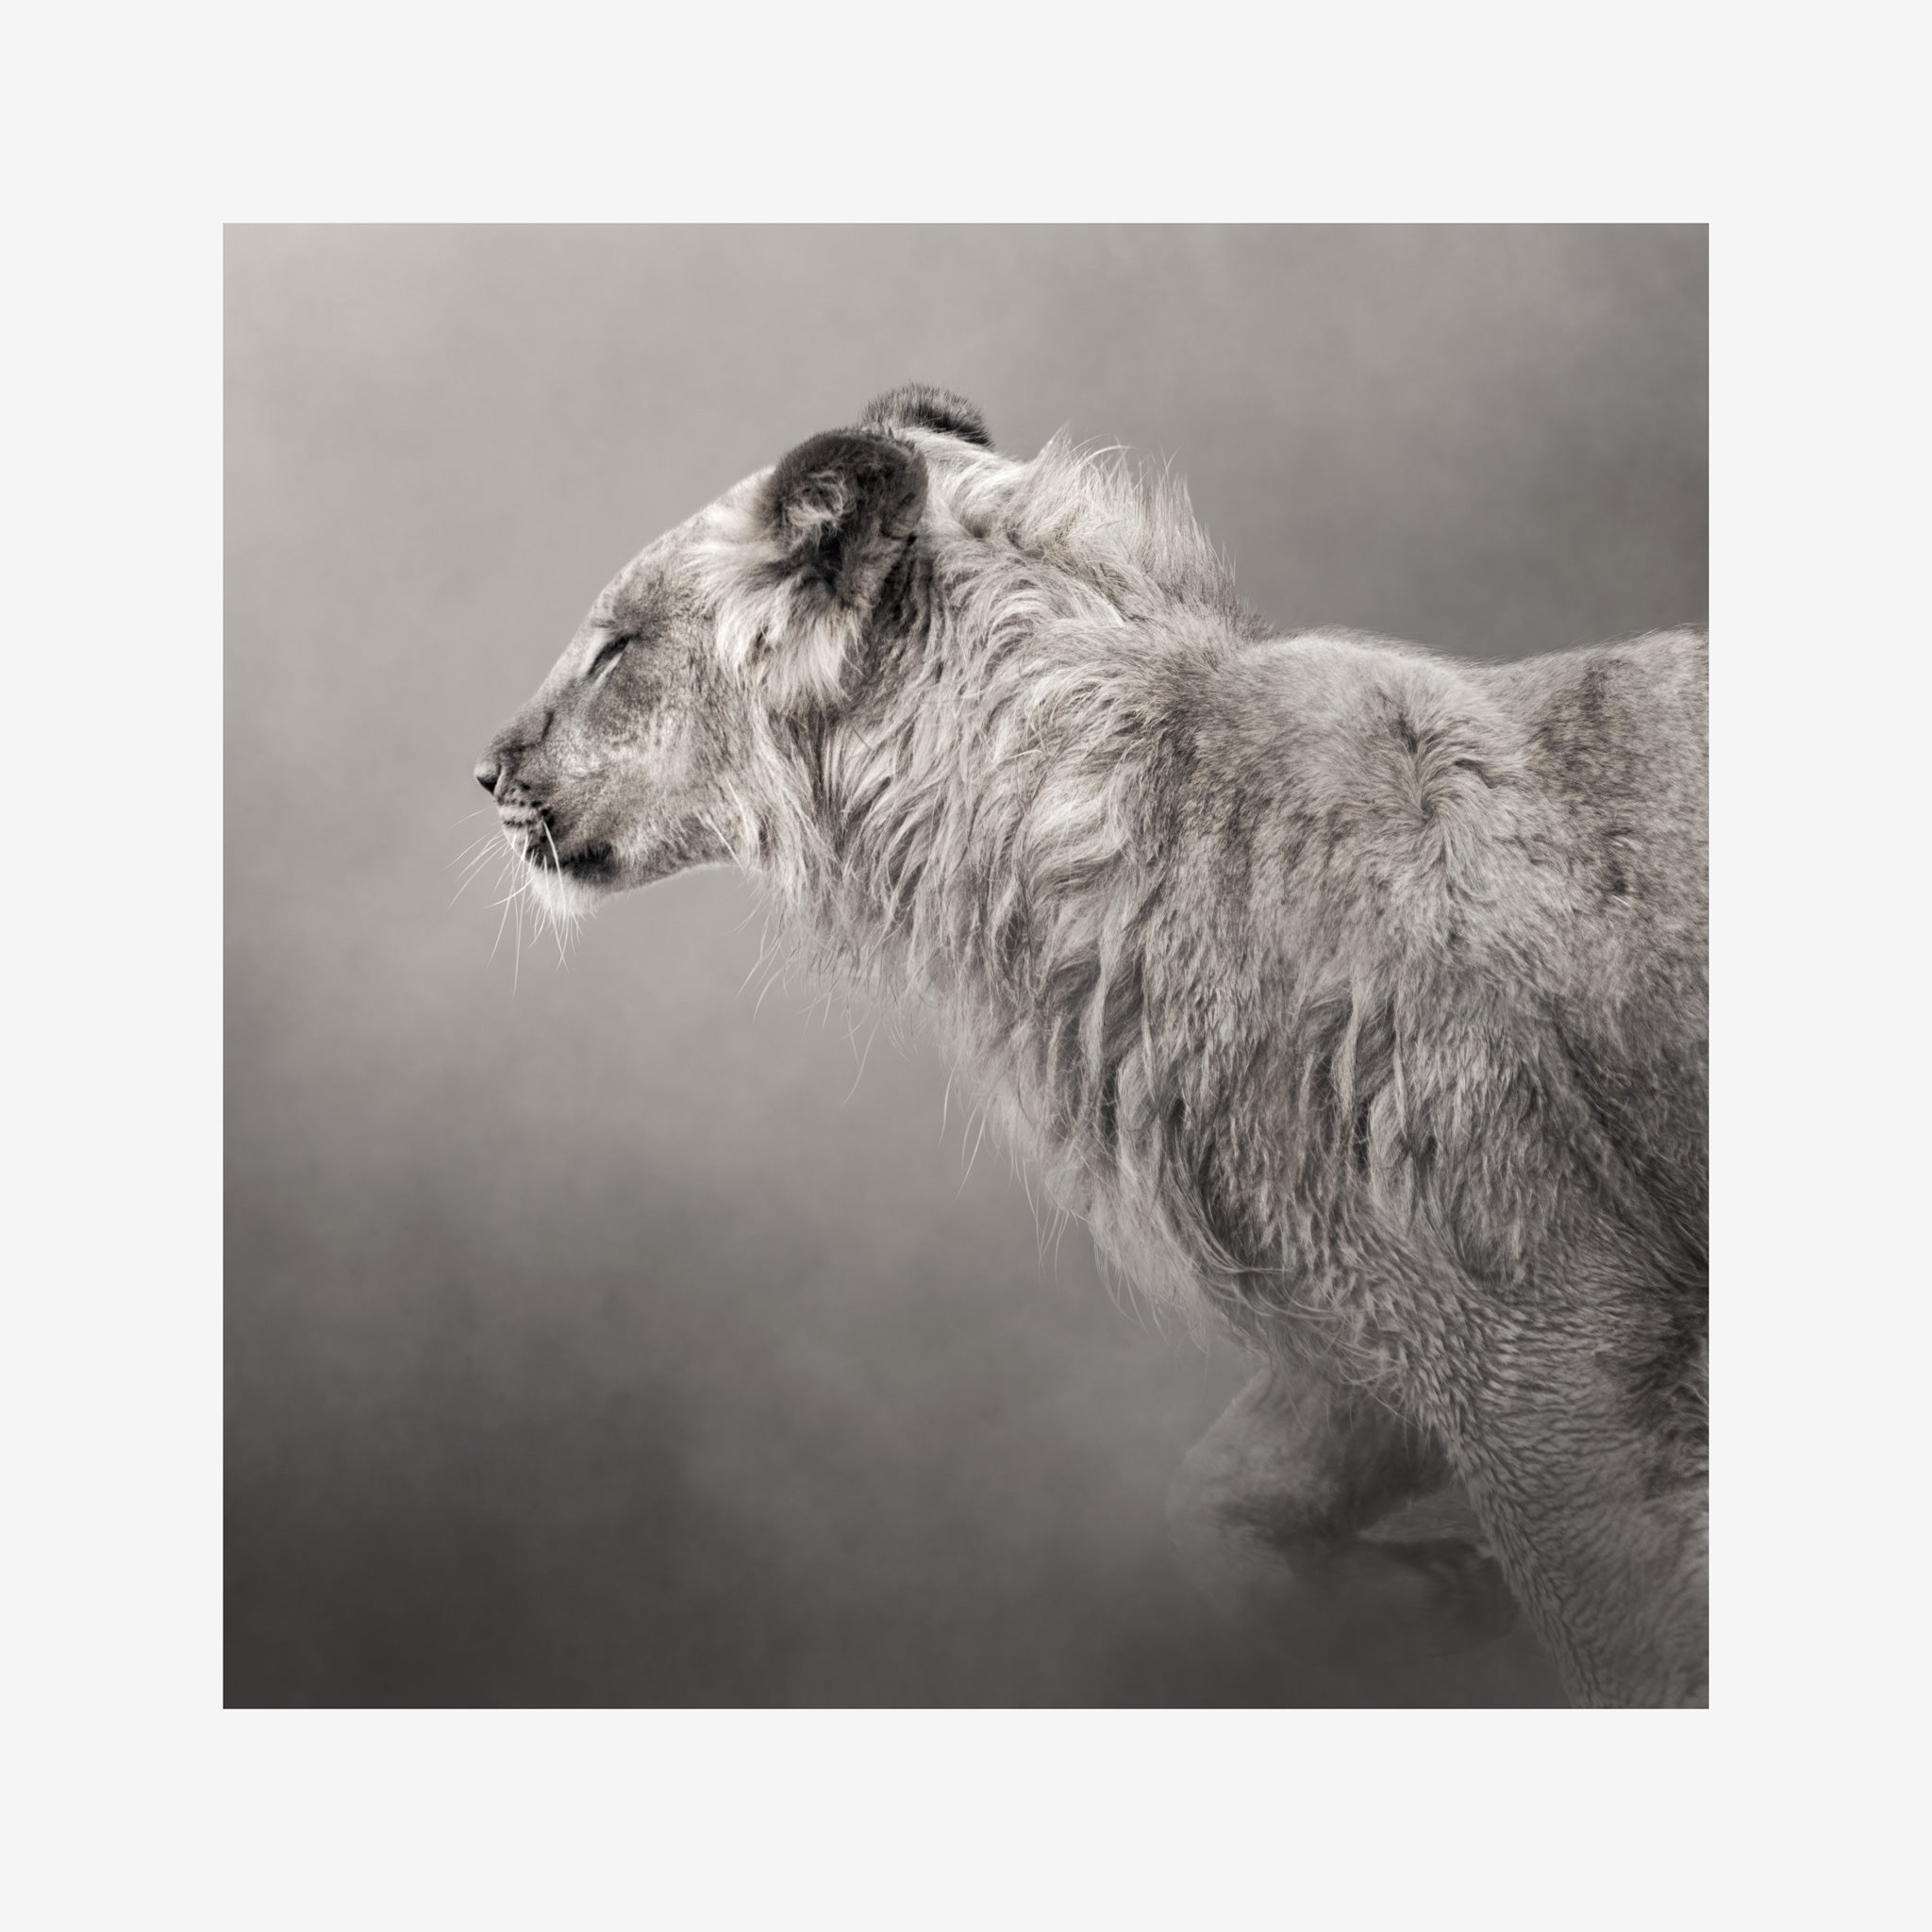 Fine Art Prints | The Lion. The pieces in this series have an ethereal feeling of weightlessness to ground you into nature, connect you with wildlife and immerse you in epic beauty. Spectacular piece of wildlife art for your wall photographed by Belinda Robertson.